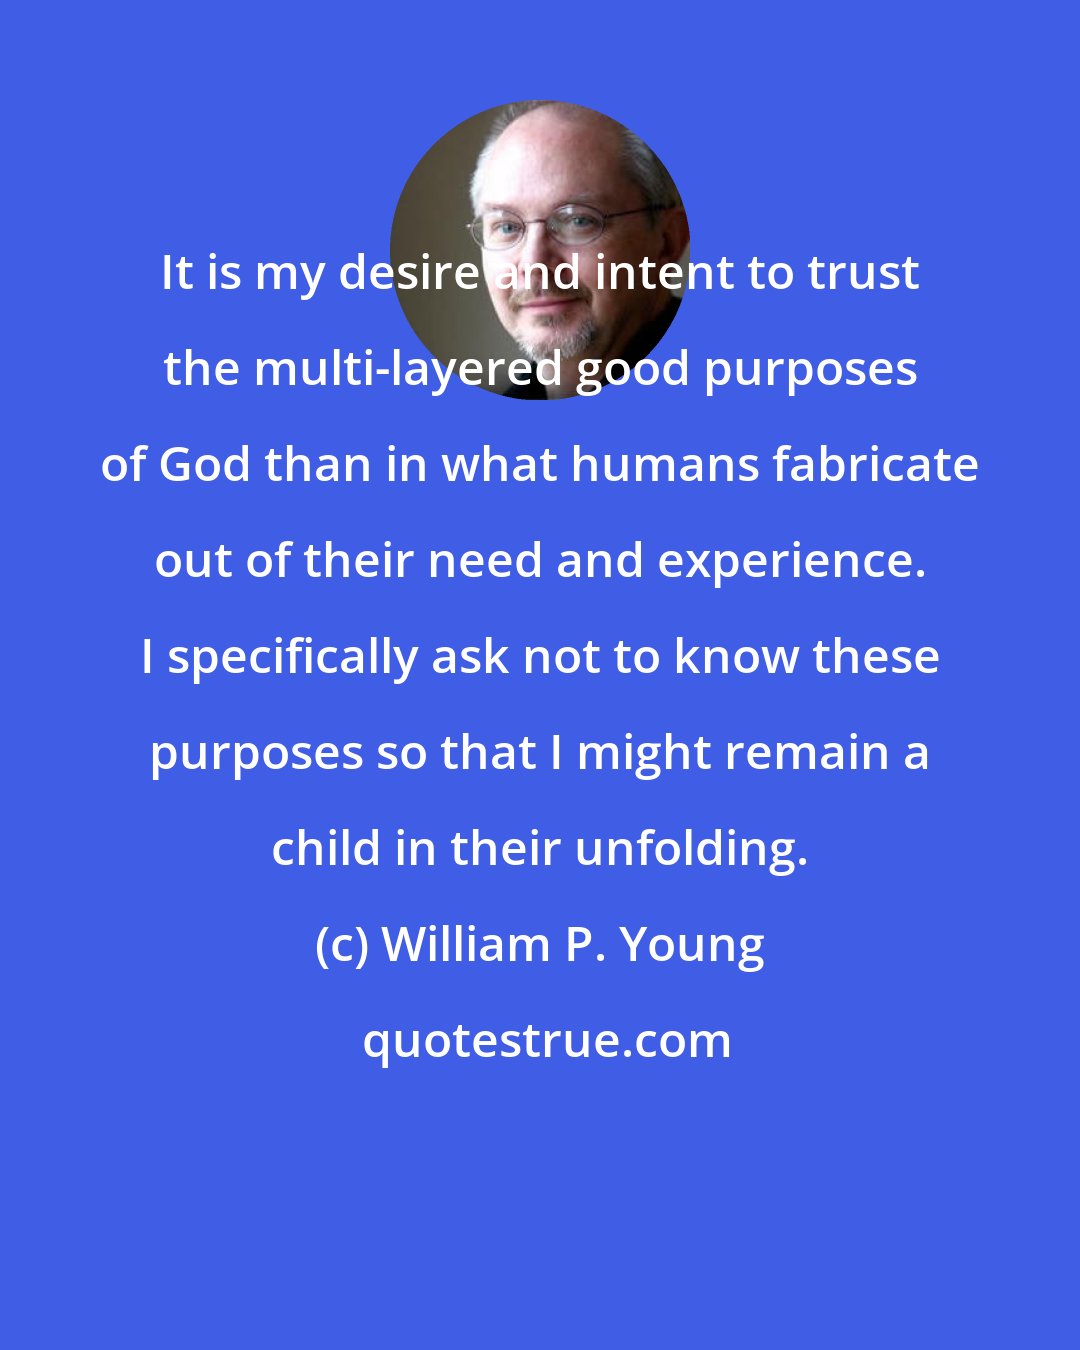 William P. Young: It is my desire and intent to trust the multi-layered good purposes of God than in what humans fabricate out of their need and experience. I specifically ask not to know these purposes so that I might remain a child in their unfolding.